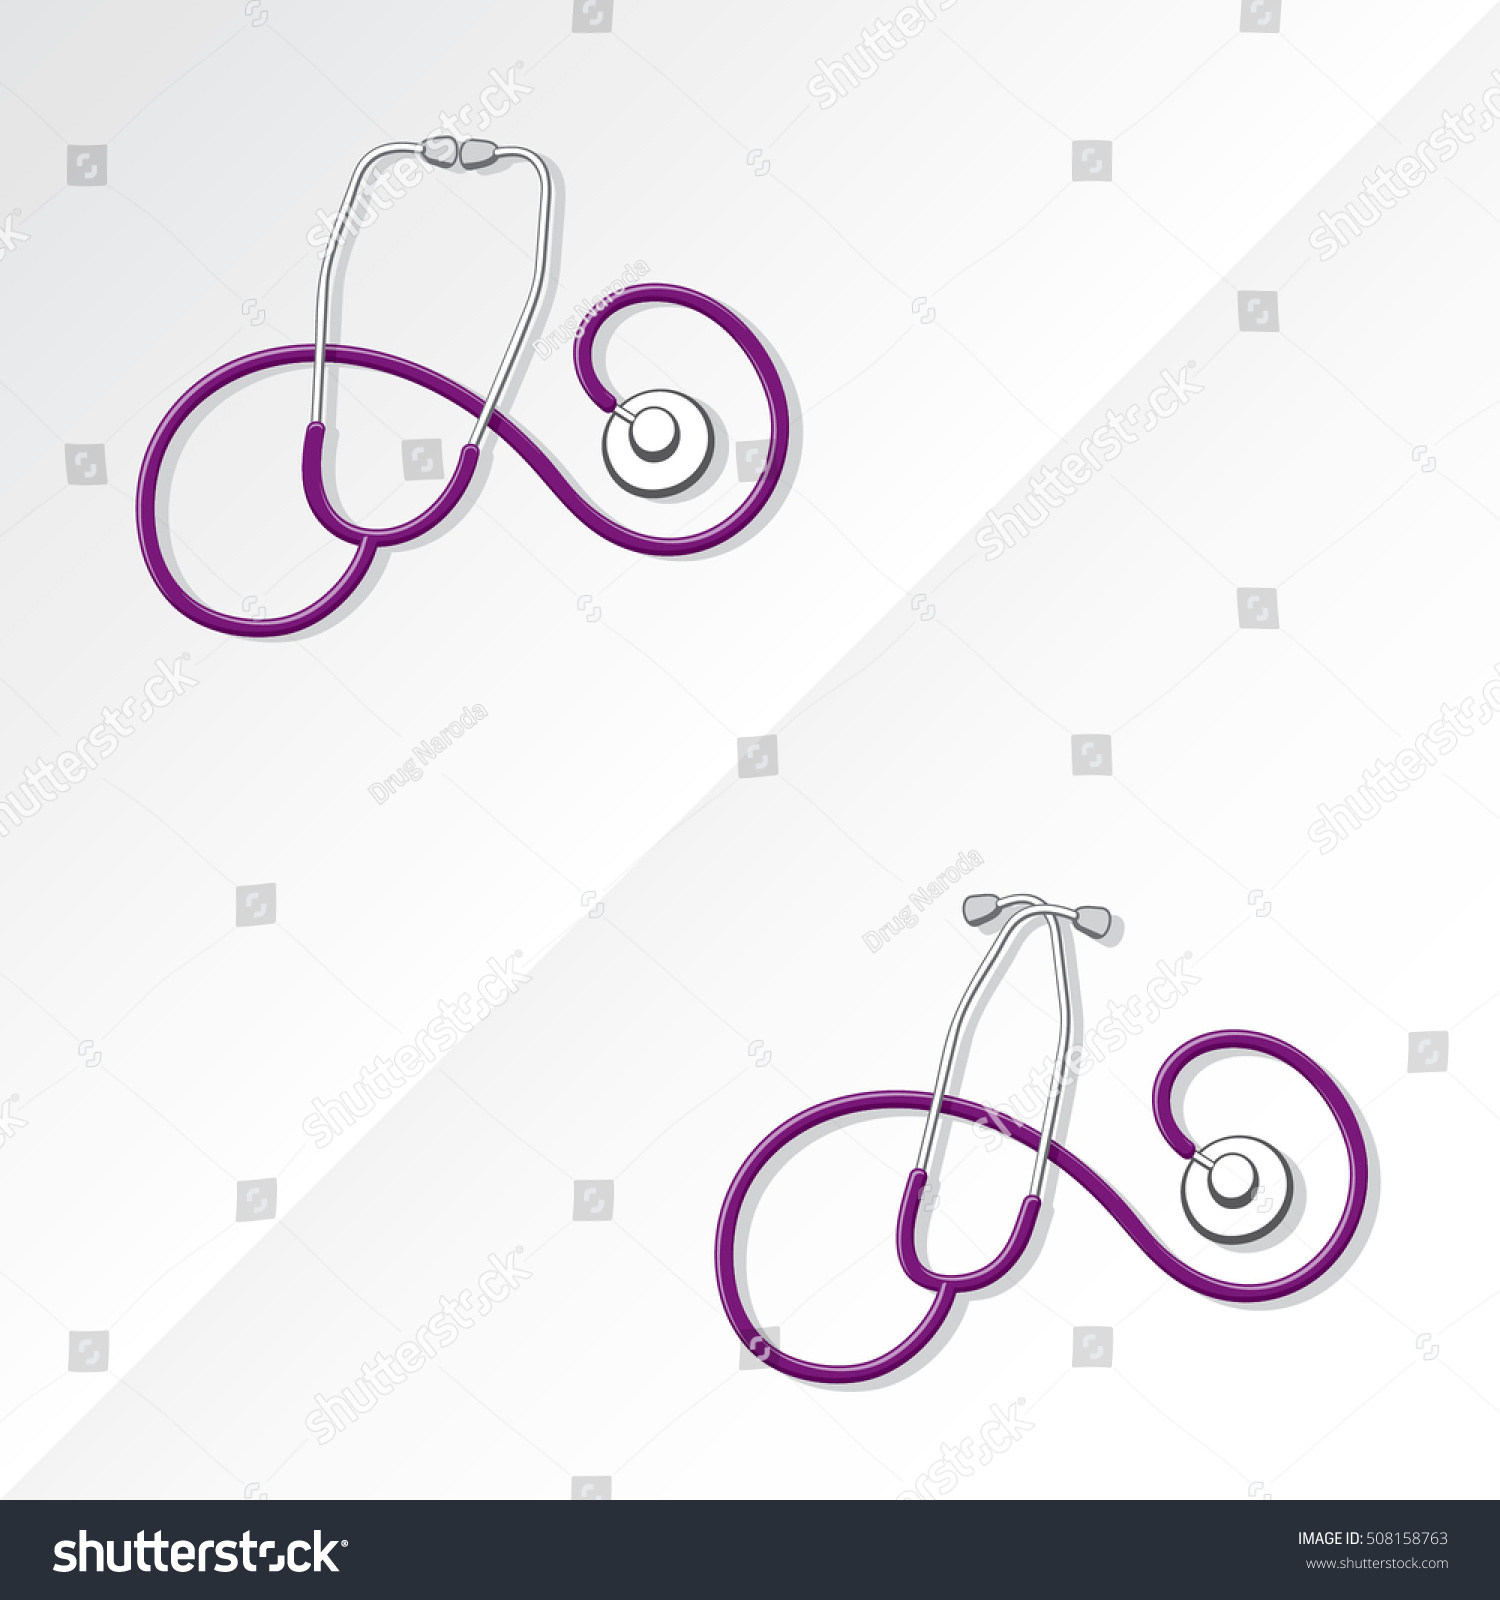 SVG of Two Medical Stethoscopes with Spiral Shape Tubing Icons Set One with Crossed Binaural Another with Eartips Put Together - Grayscale and Purple Objects on White Background - Realistic Flat Design svg